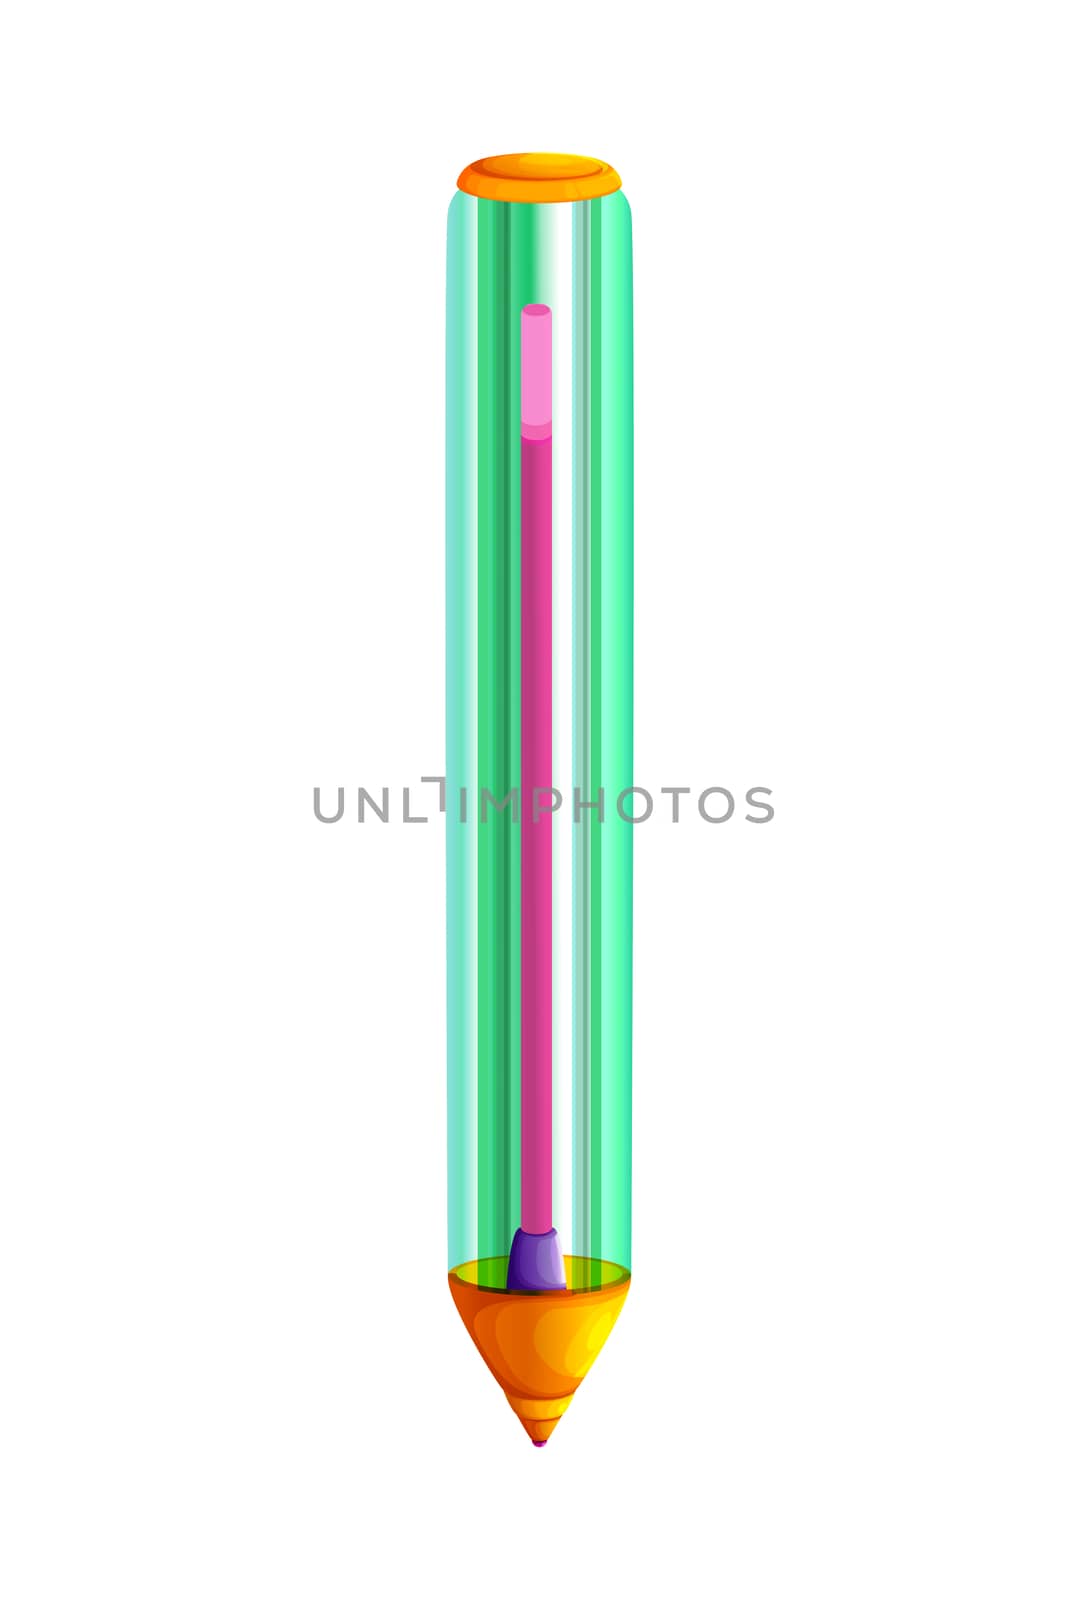 An illustration of a beautiful and nice green and transparent pen